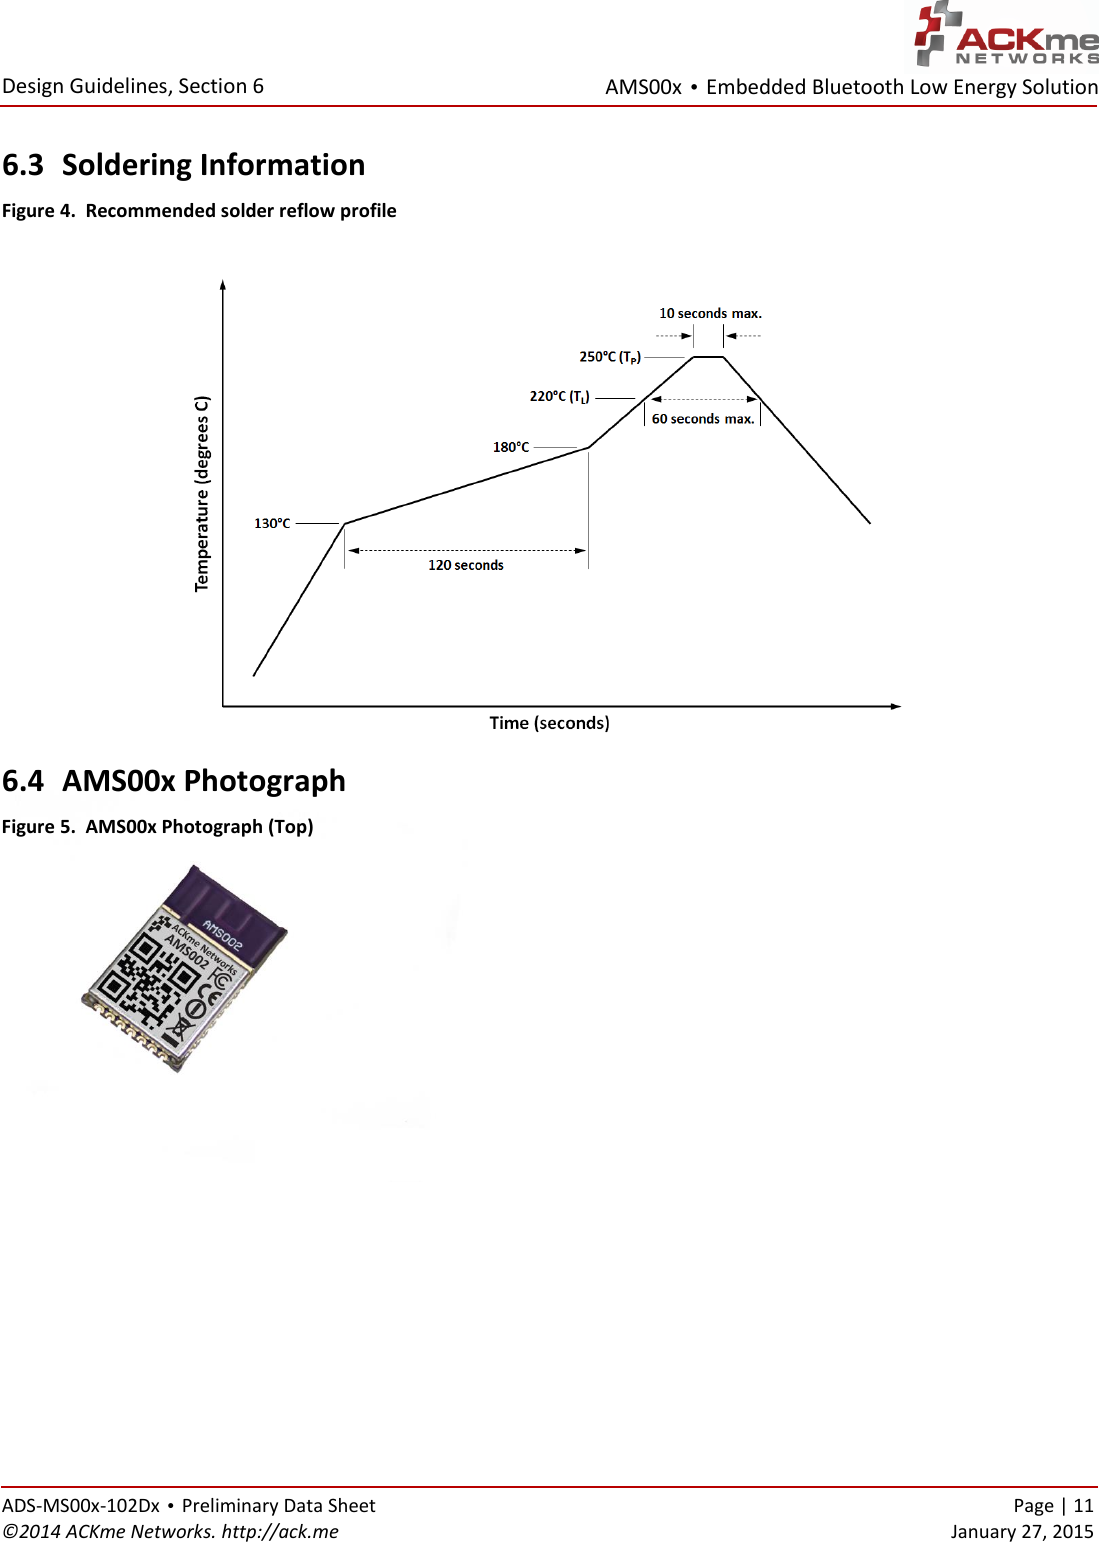 AMS00x • Embedded Bluetooth Low Energy Solution  Design Guidelines, Section 6 ADS-MS00x-102Dx • Preliminary Data Sheet    Page | 11 ©2014 ACKme Networks. http://ack.me    January 27, 2015 6.3 Soldering Information Figure 4.  Recommended solder reflow profile   6.4 AMS00x Photograph Figure 5.  AMS00x Photograph (Top)       